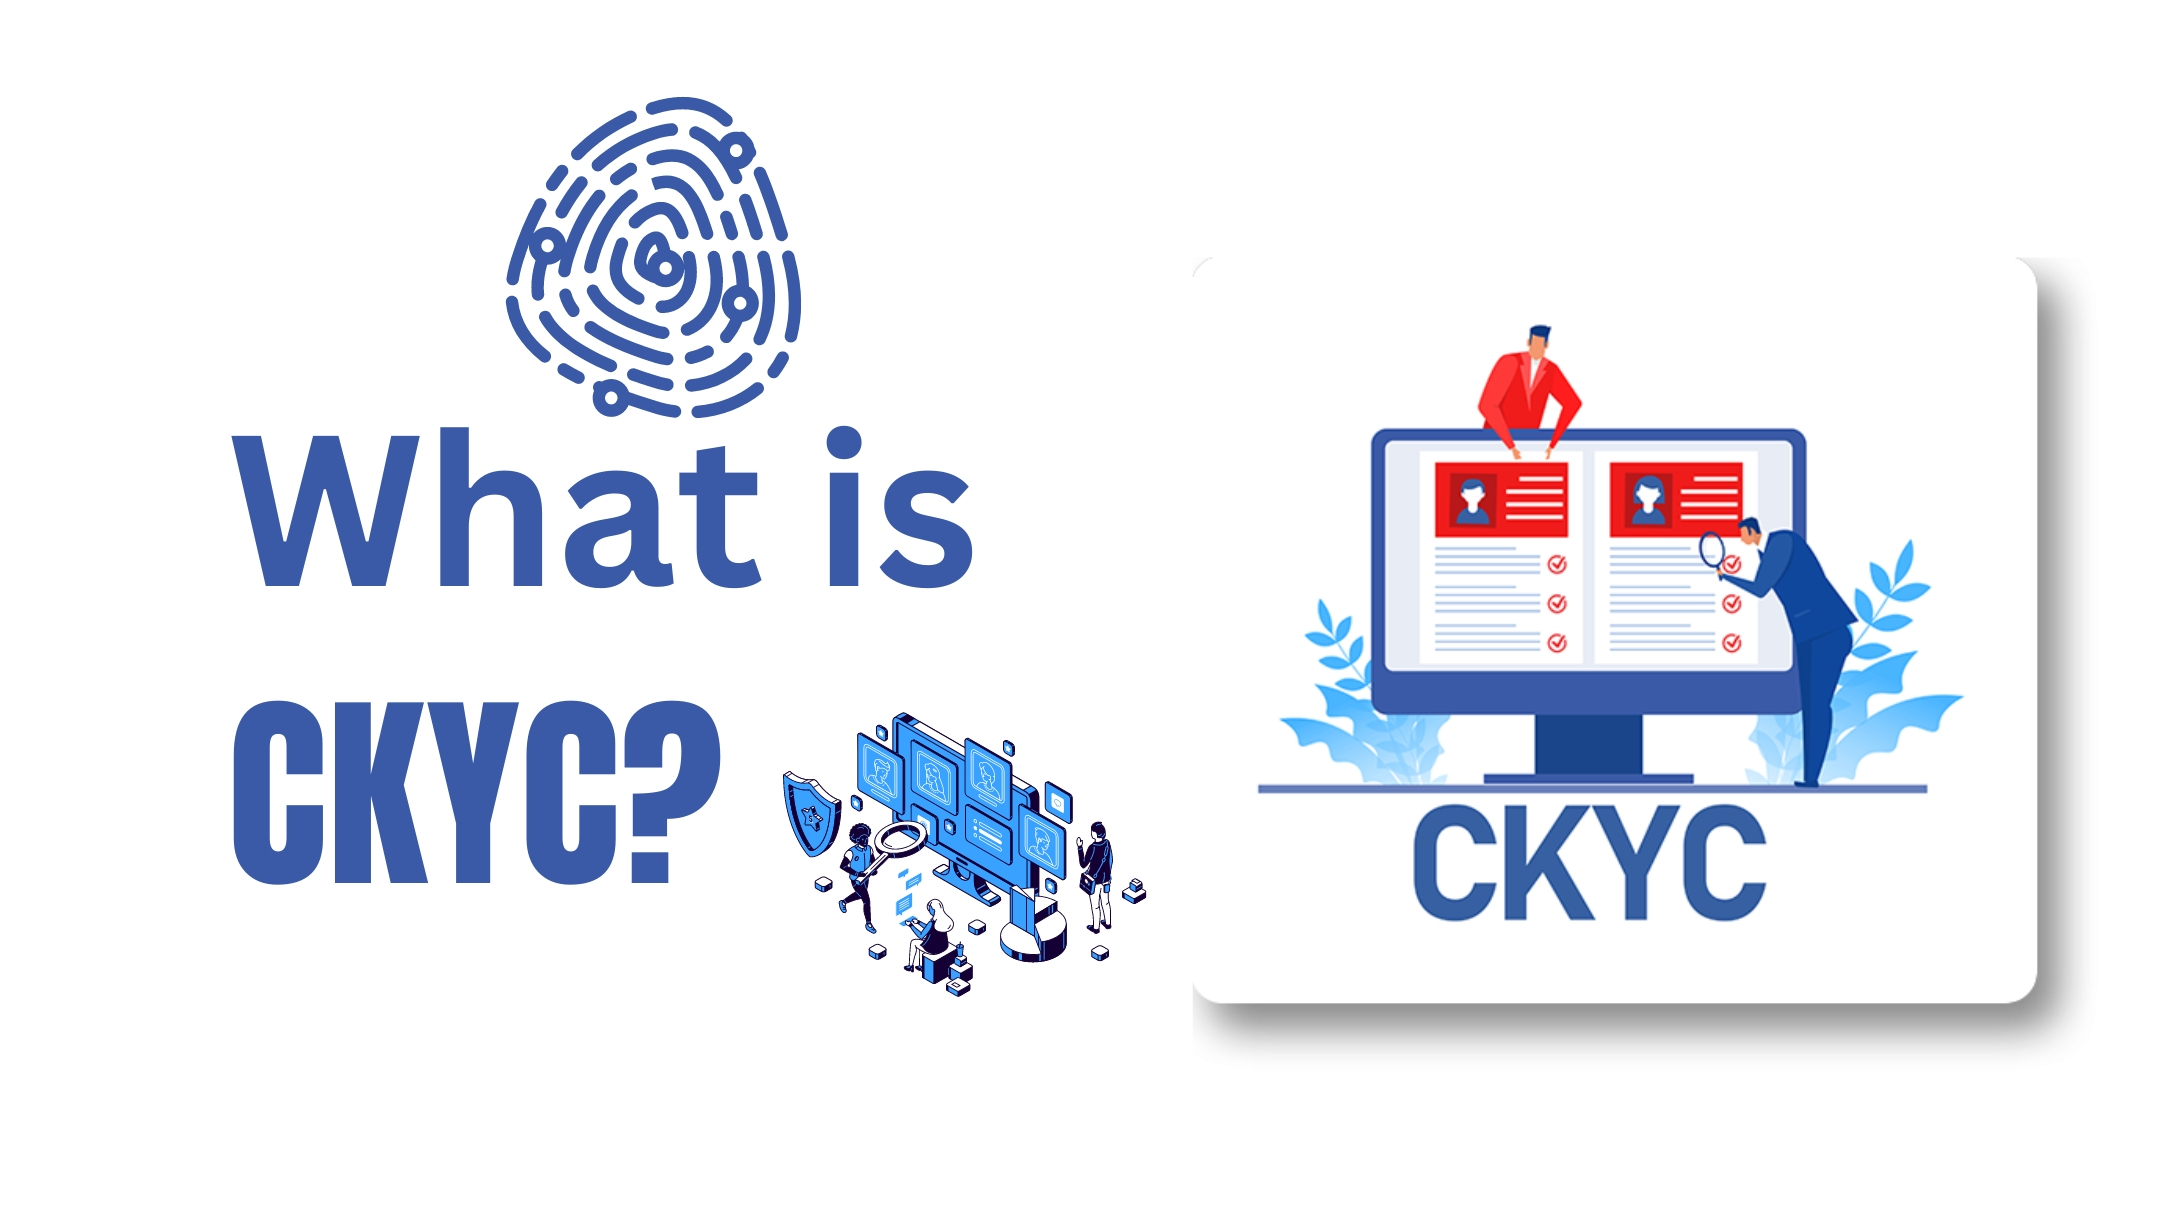 What is CKYC?